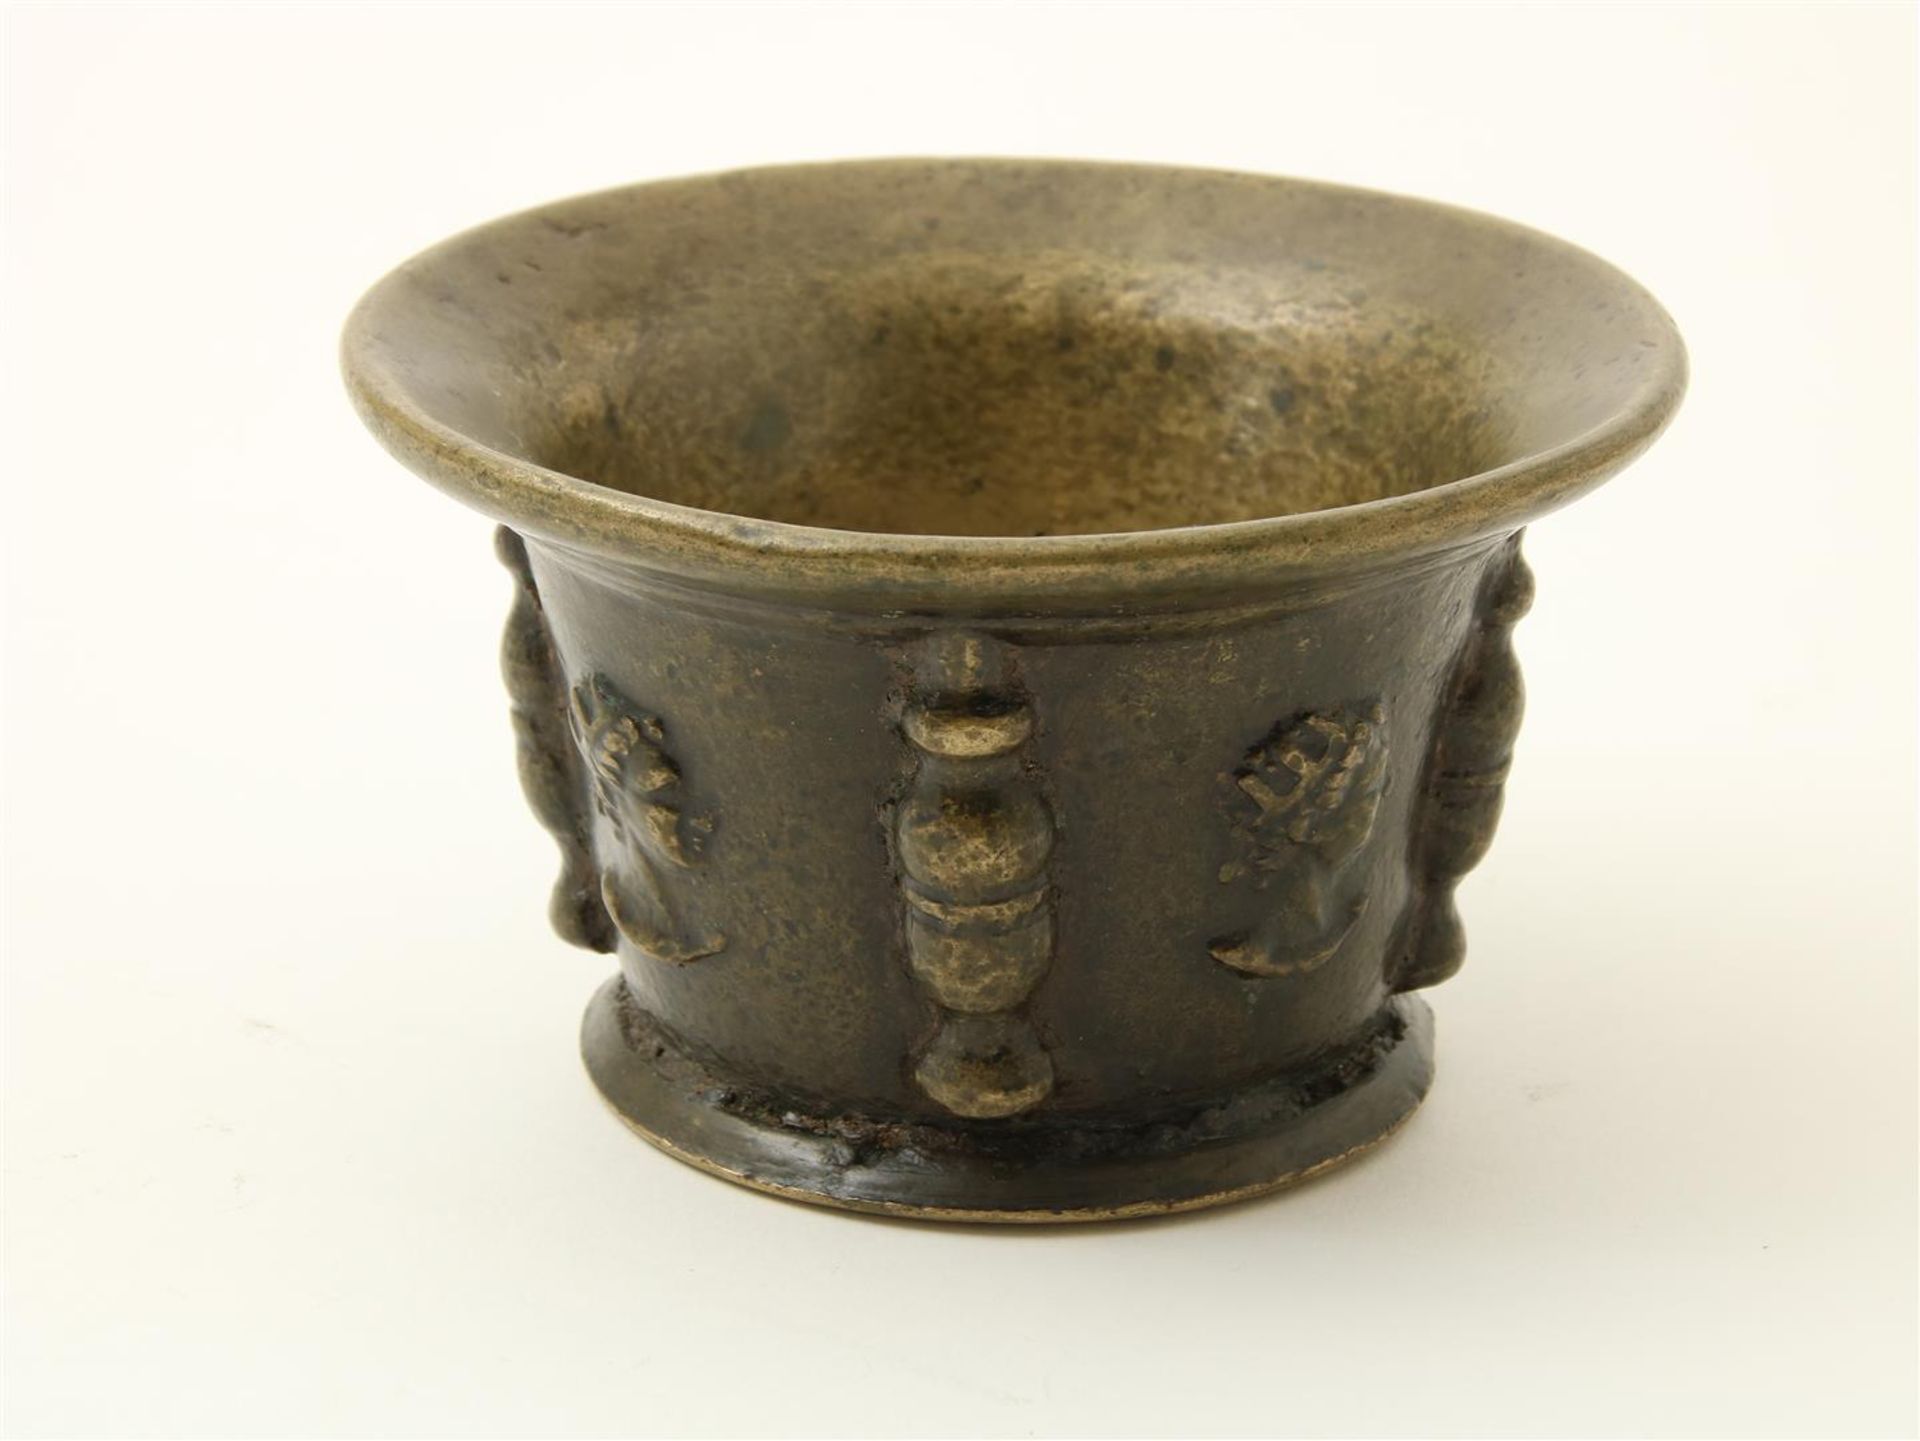 Bronze mortar decorated with ribs and portrait heads, Spain, 17th century. - Image 2 of 4